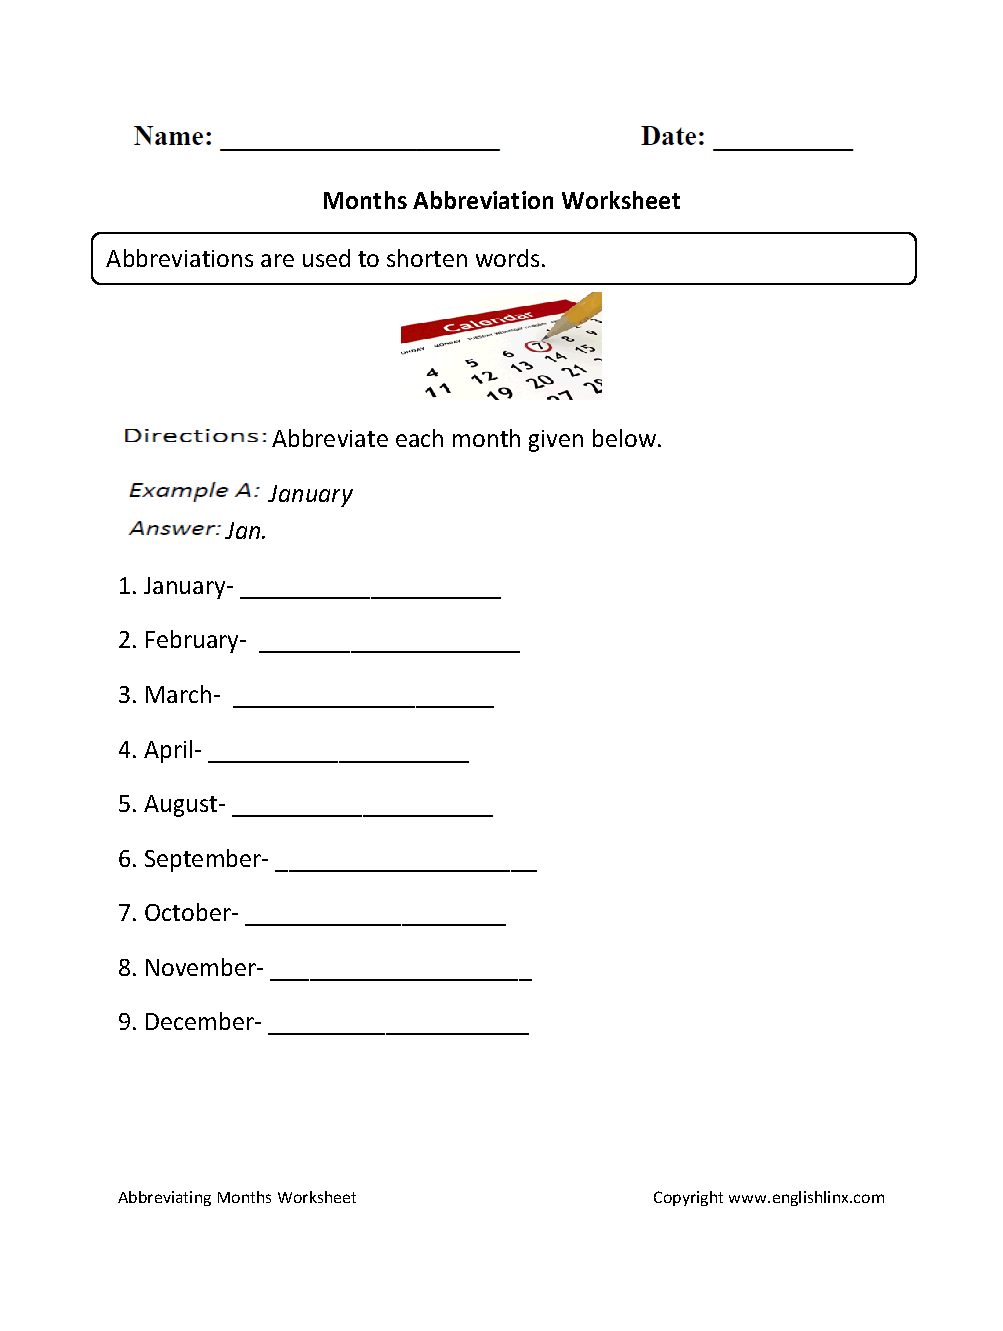 Days of the Week Abbreviation Worksheets